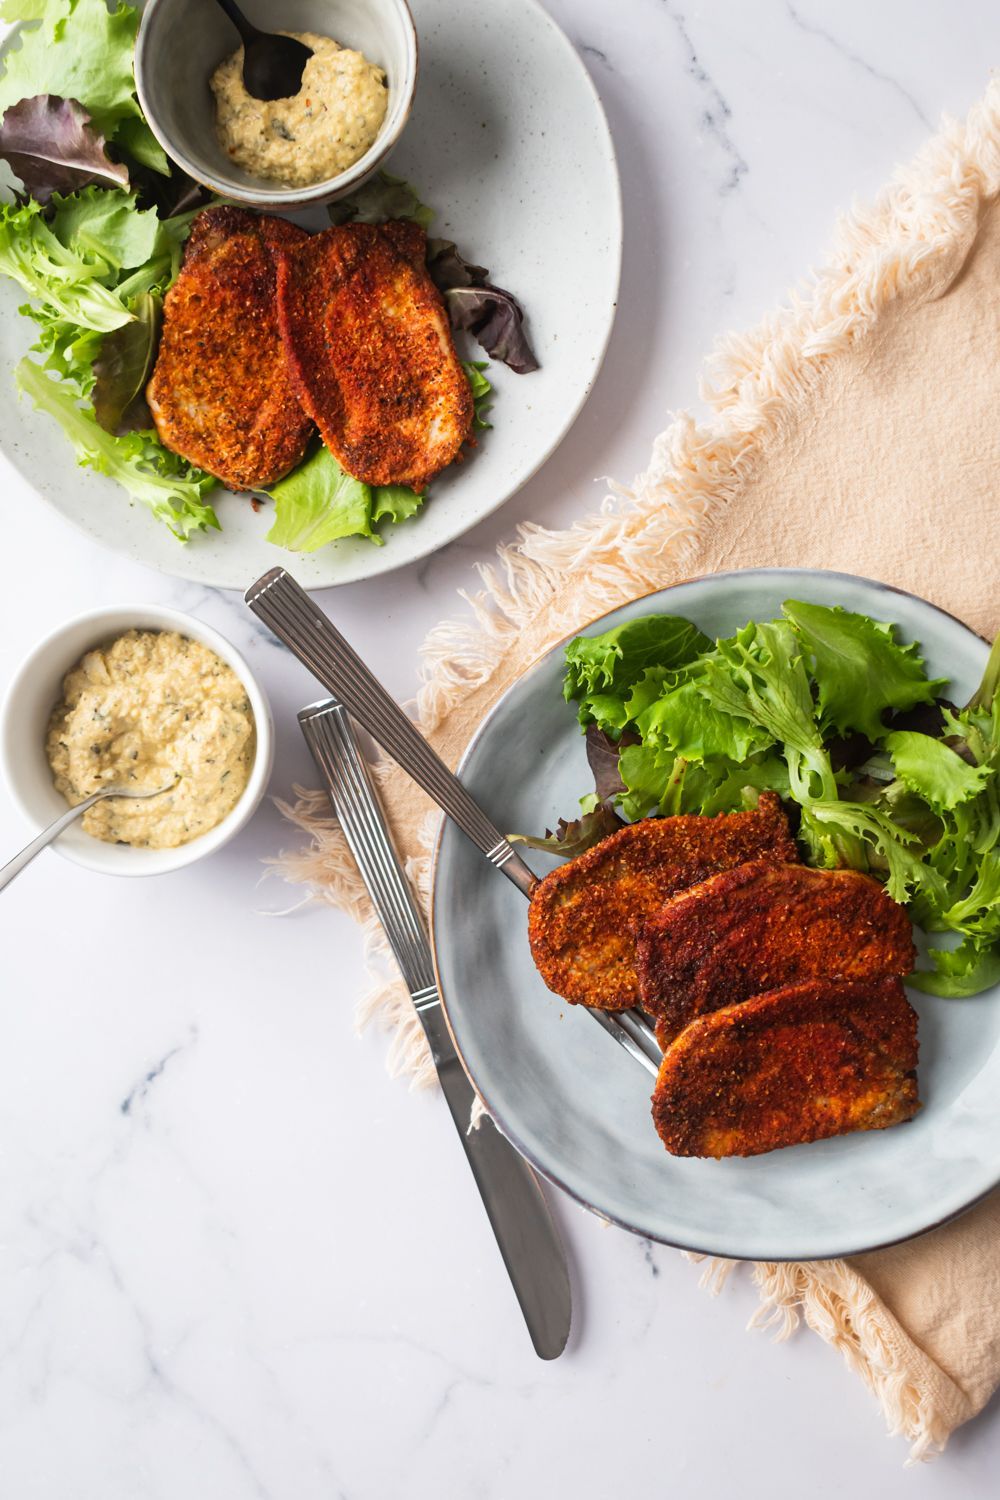 Baked spiced pork chops with a crispy spice rub on a plate with green salad and mustard sauce